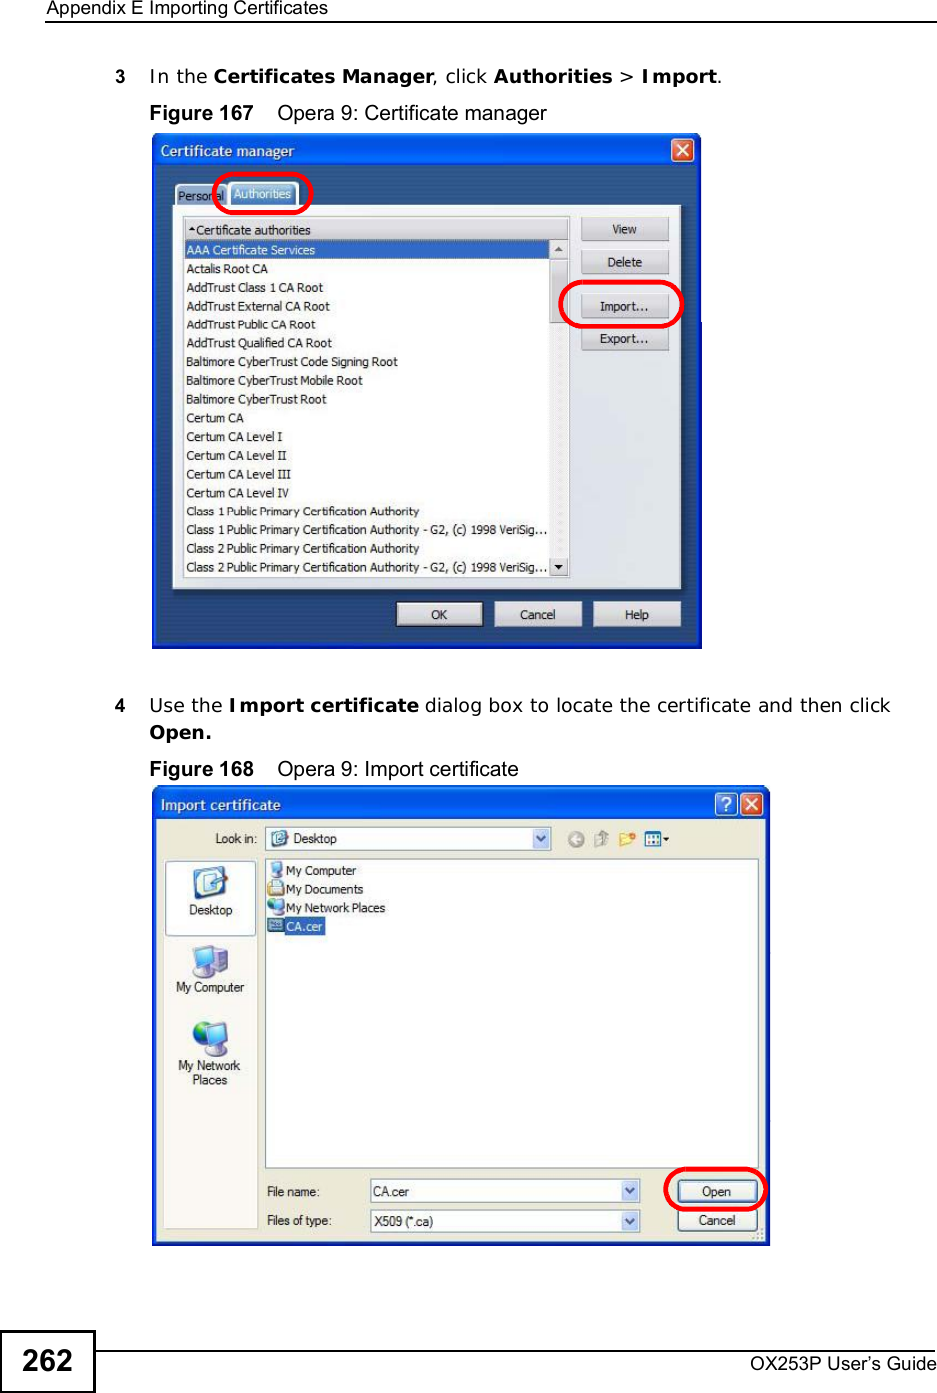 Appendix EImporting CertificatesOX253P User’s Guide2623In the Certificates Manager, click Authorities &gt; Import.Figure 167    Opera 9: Certificate manager4Use the Import certificate dialog box to locate the certificate and then clickOpen.Figure 168    Opera 9: Import certificate